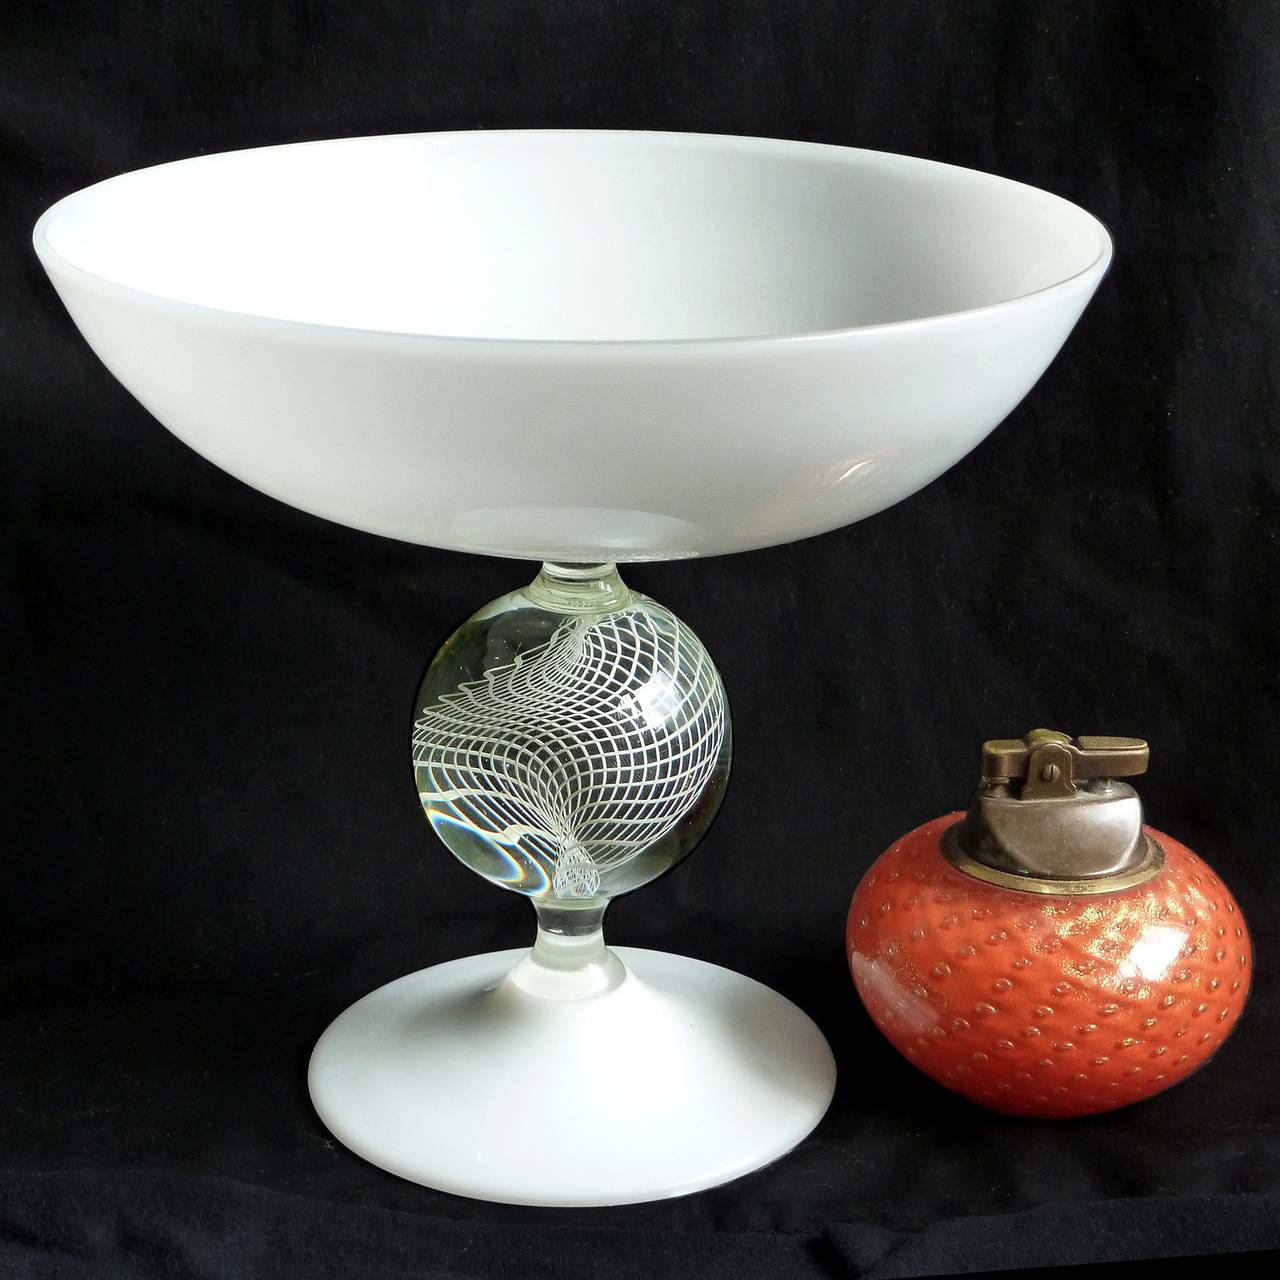 Very rare and elegant Murano handblown white Italian art glass compote bowl with Filigrana ribbon ball decoration. Documented to designer Archimede Seguso, circa 1958, and published in his book. The piece is snow white, with a net design centre